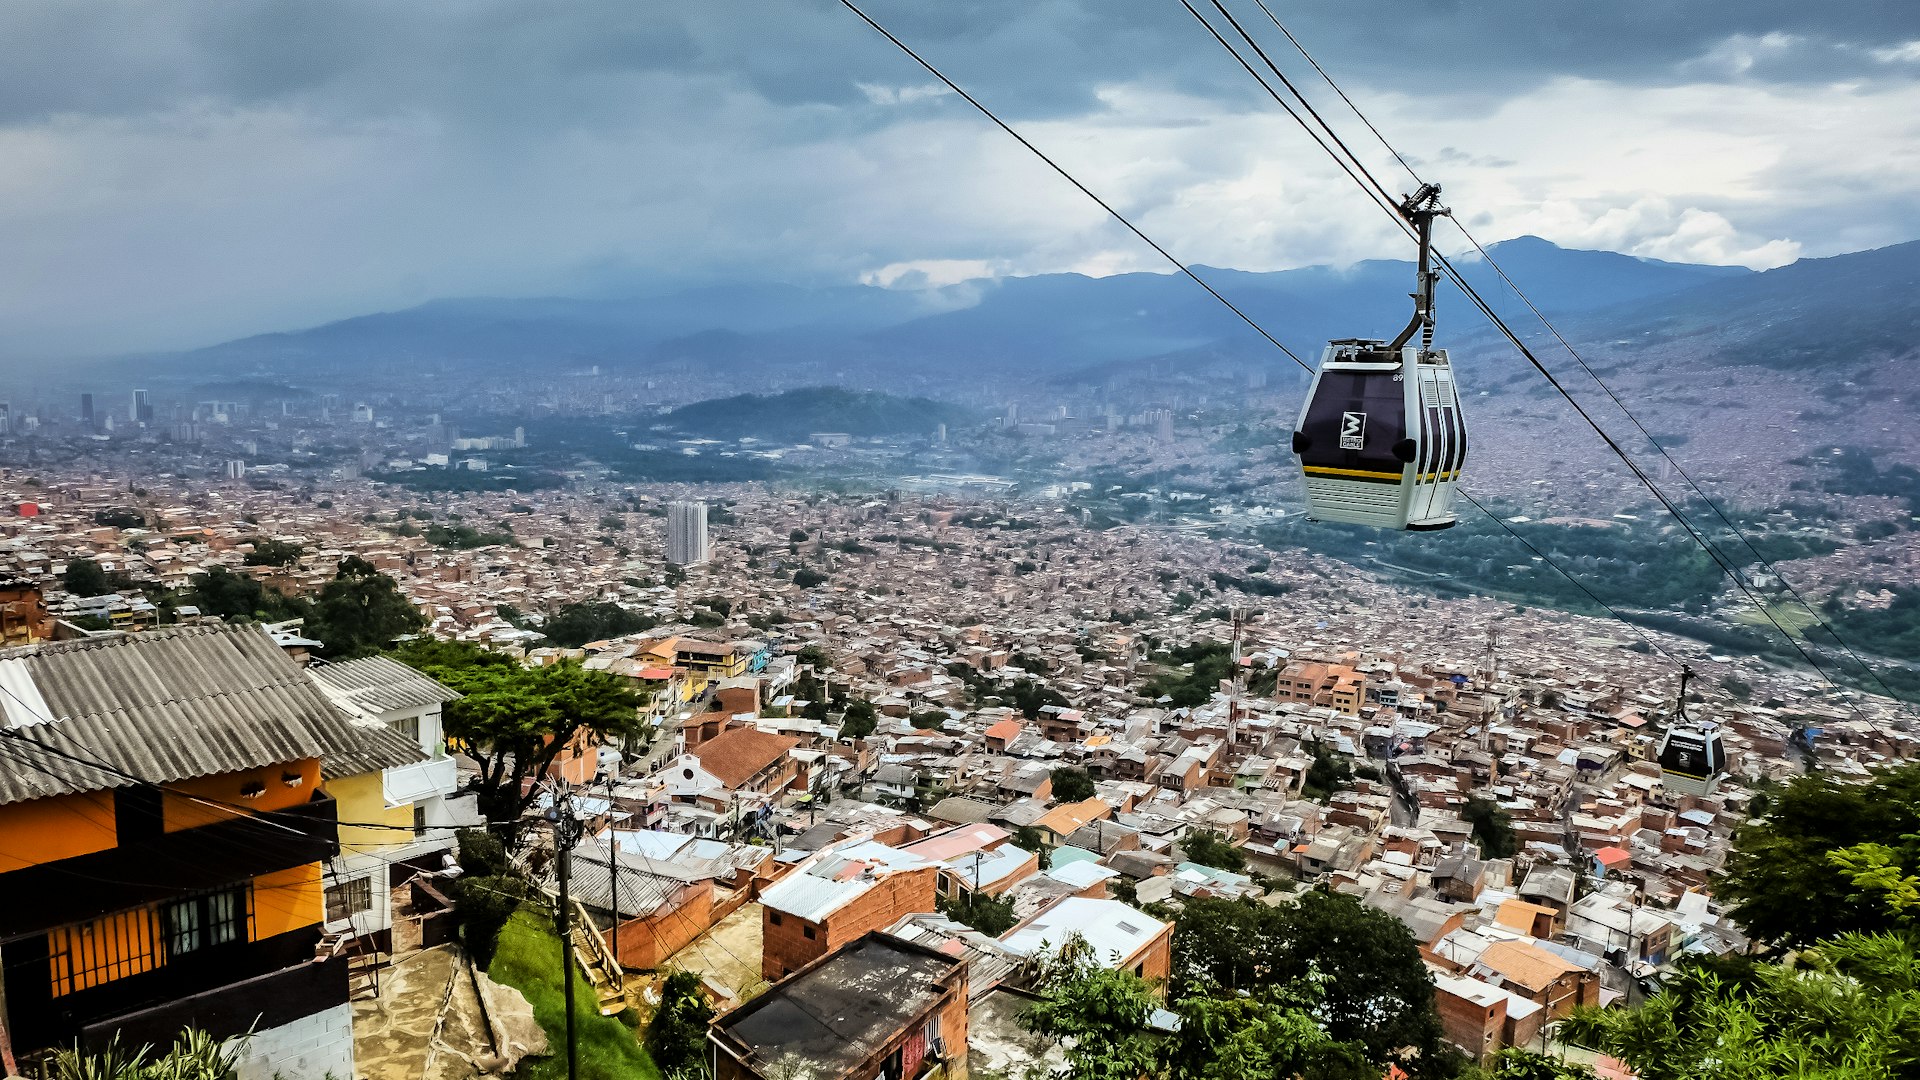 A cable car flies high above a congested city 